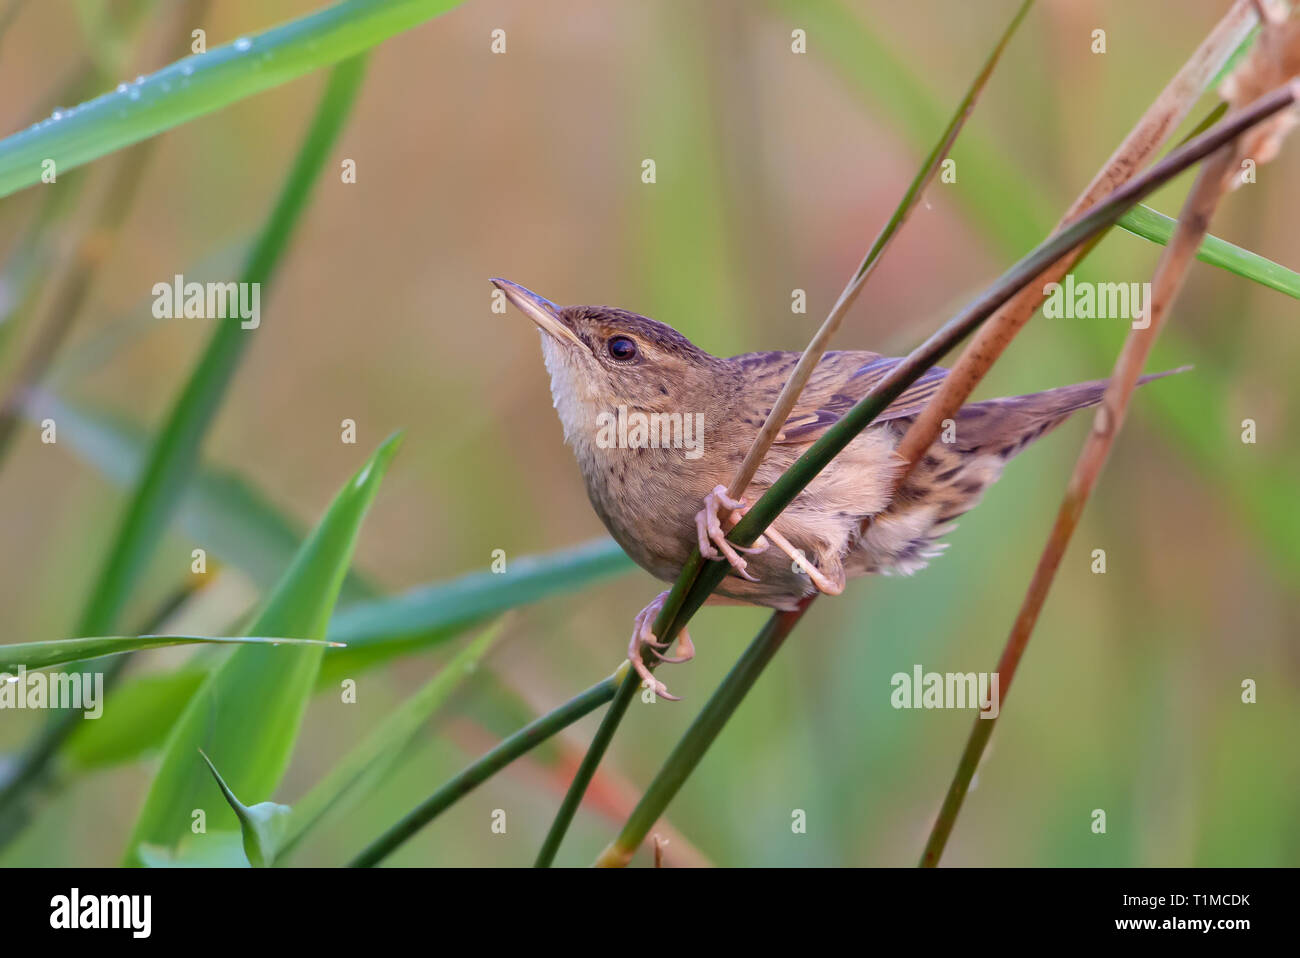 Adult male Common grasshopper warbler posing in grass Stock Photo